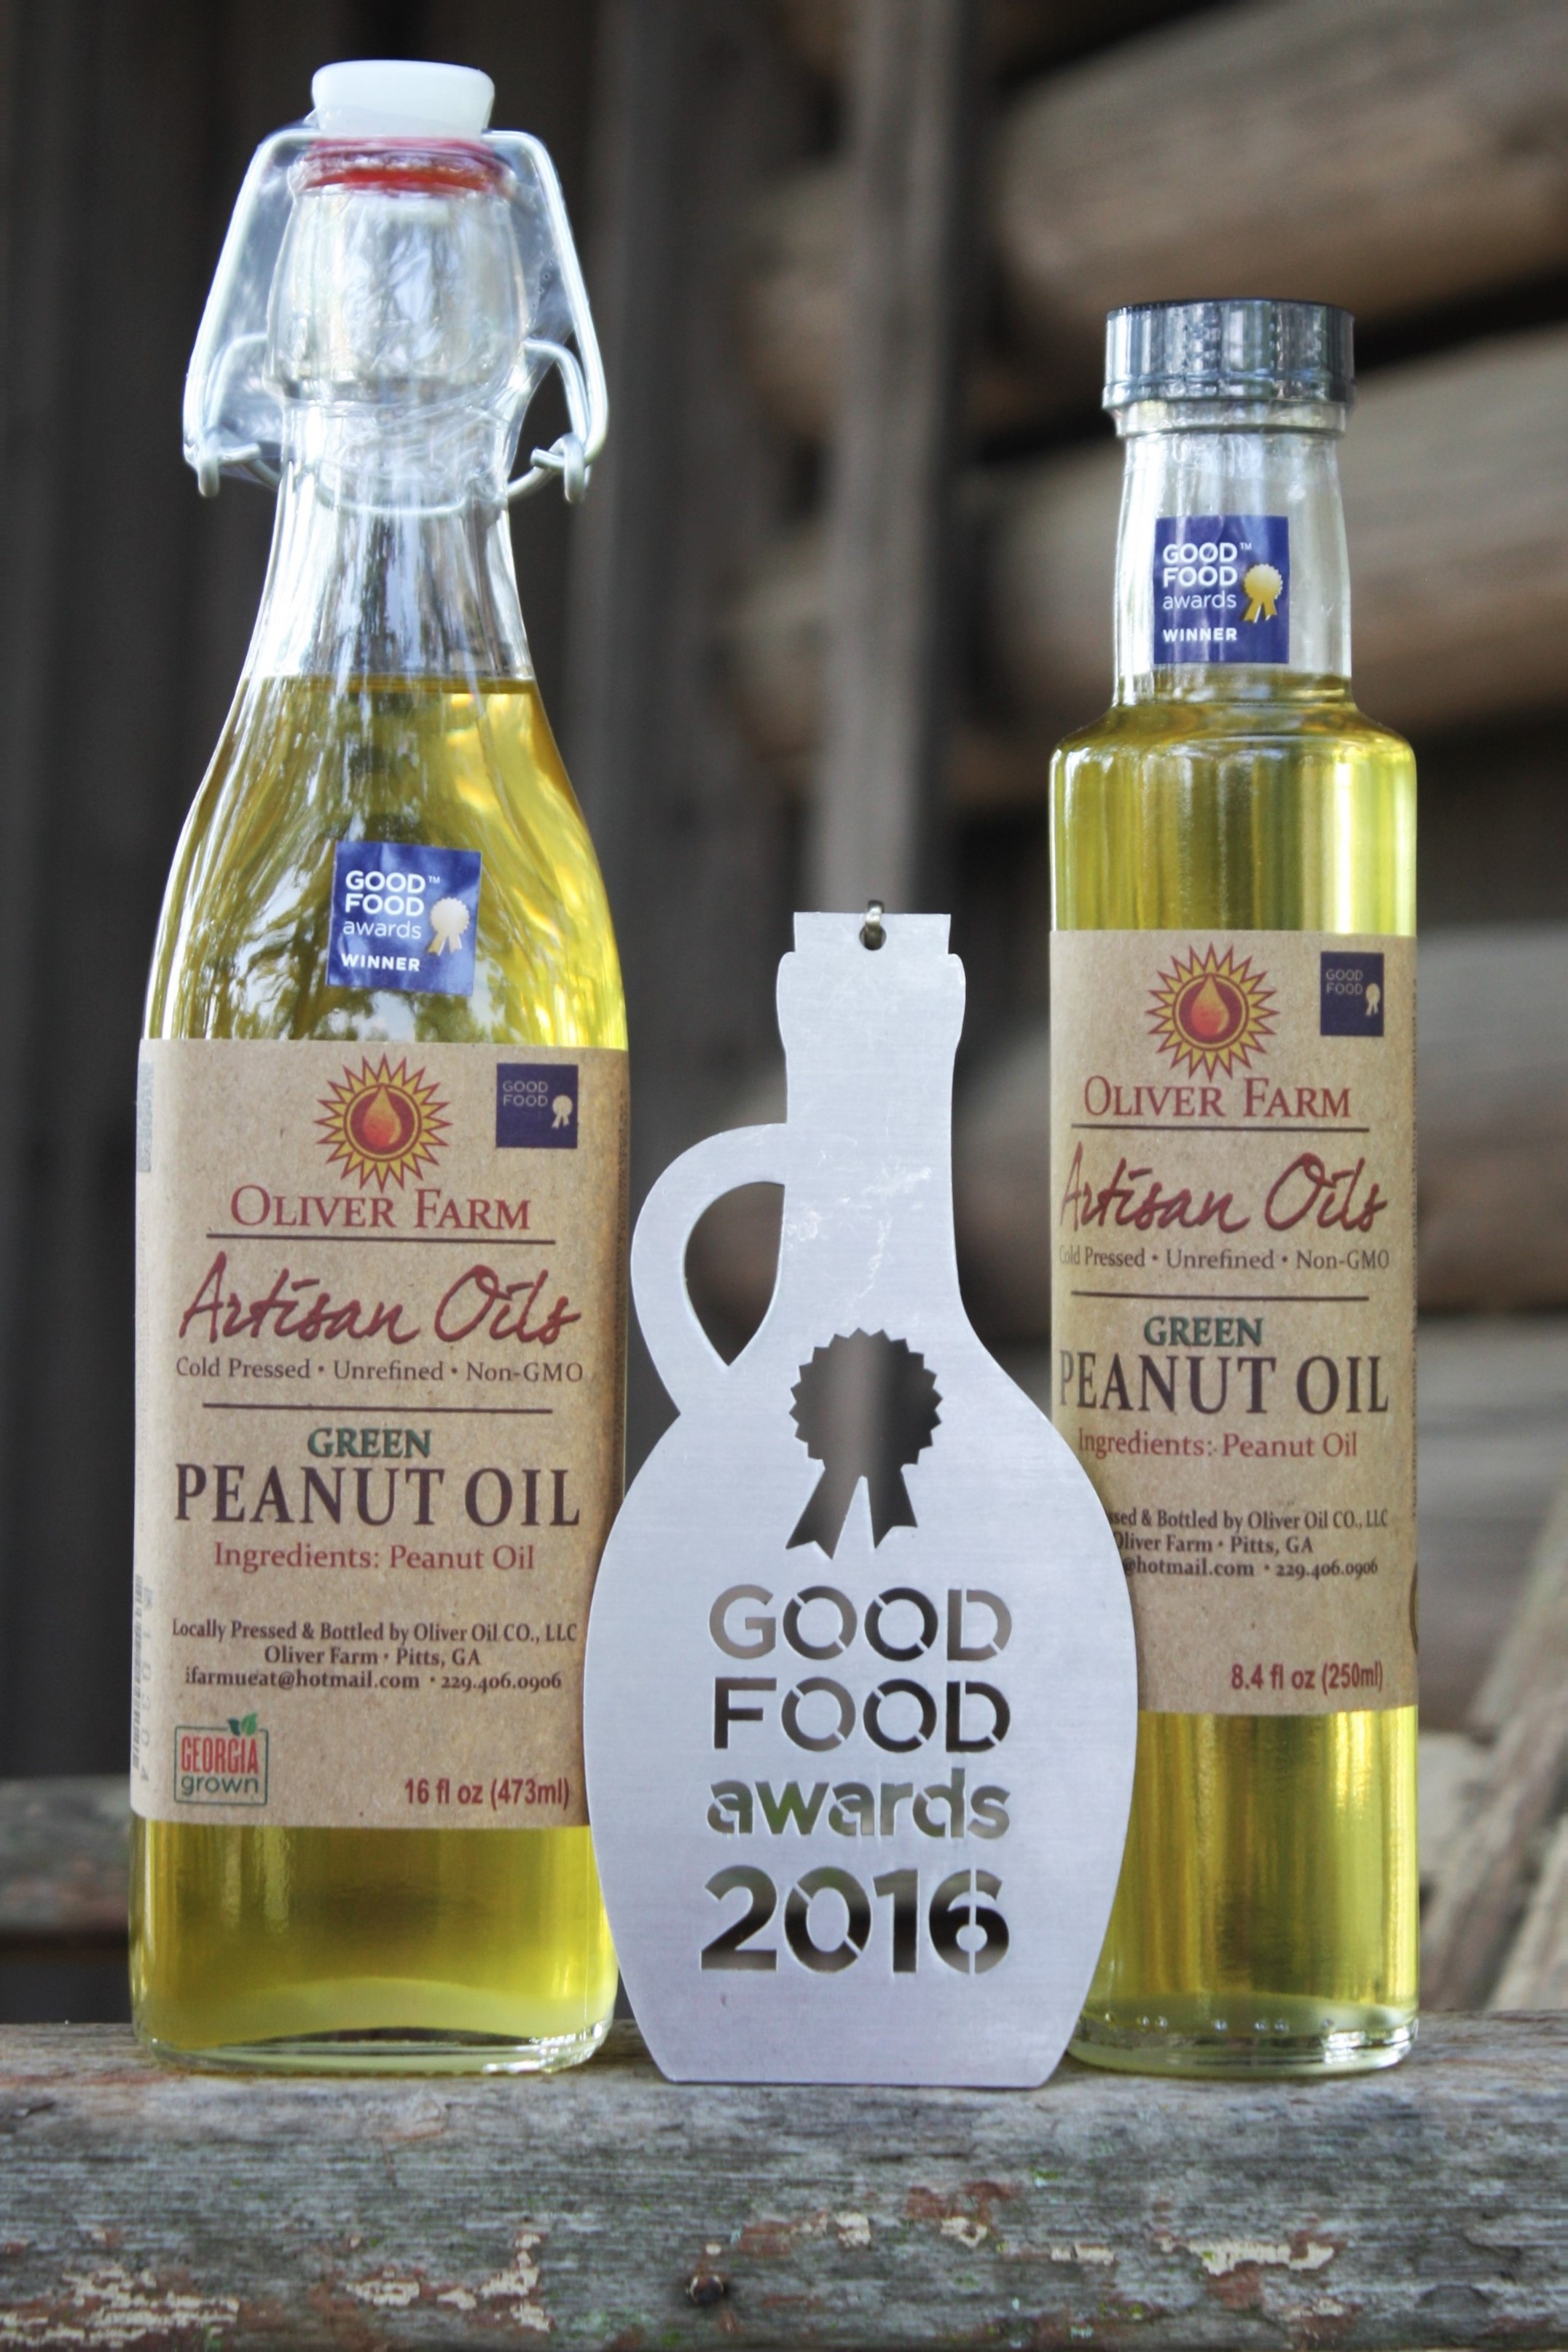 green peanut oil and award/trophy 